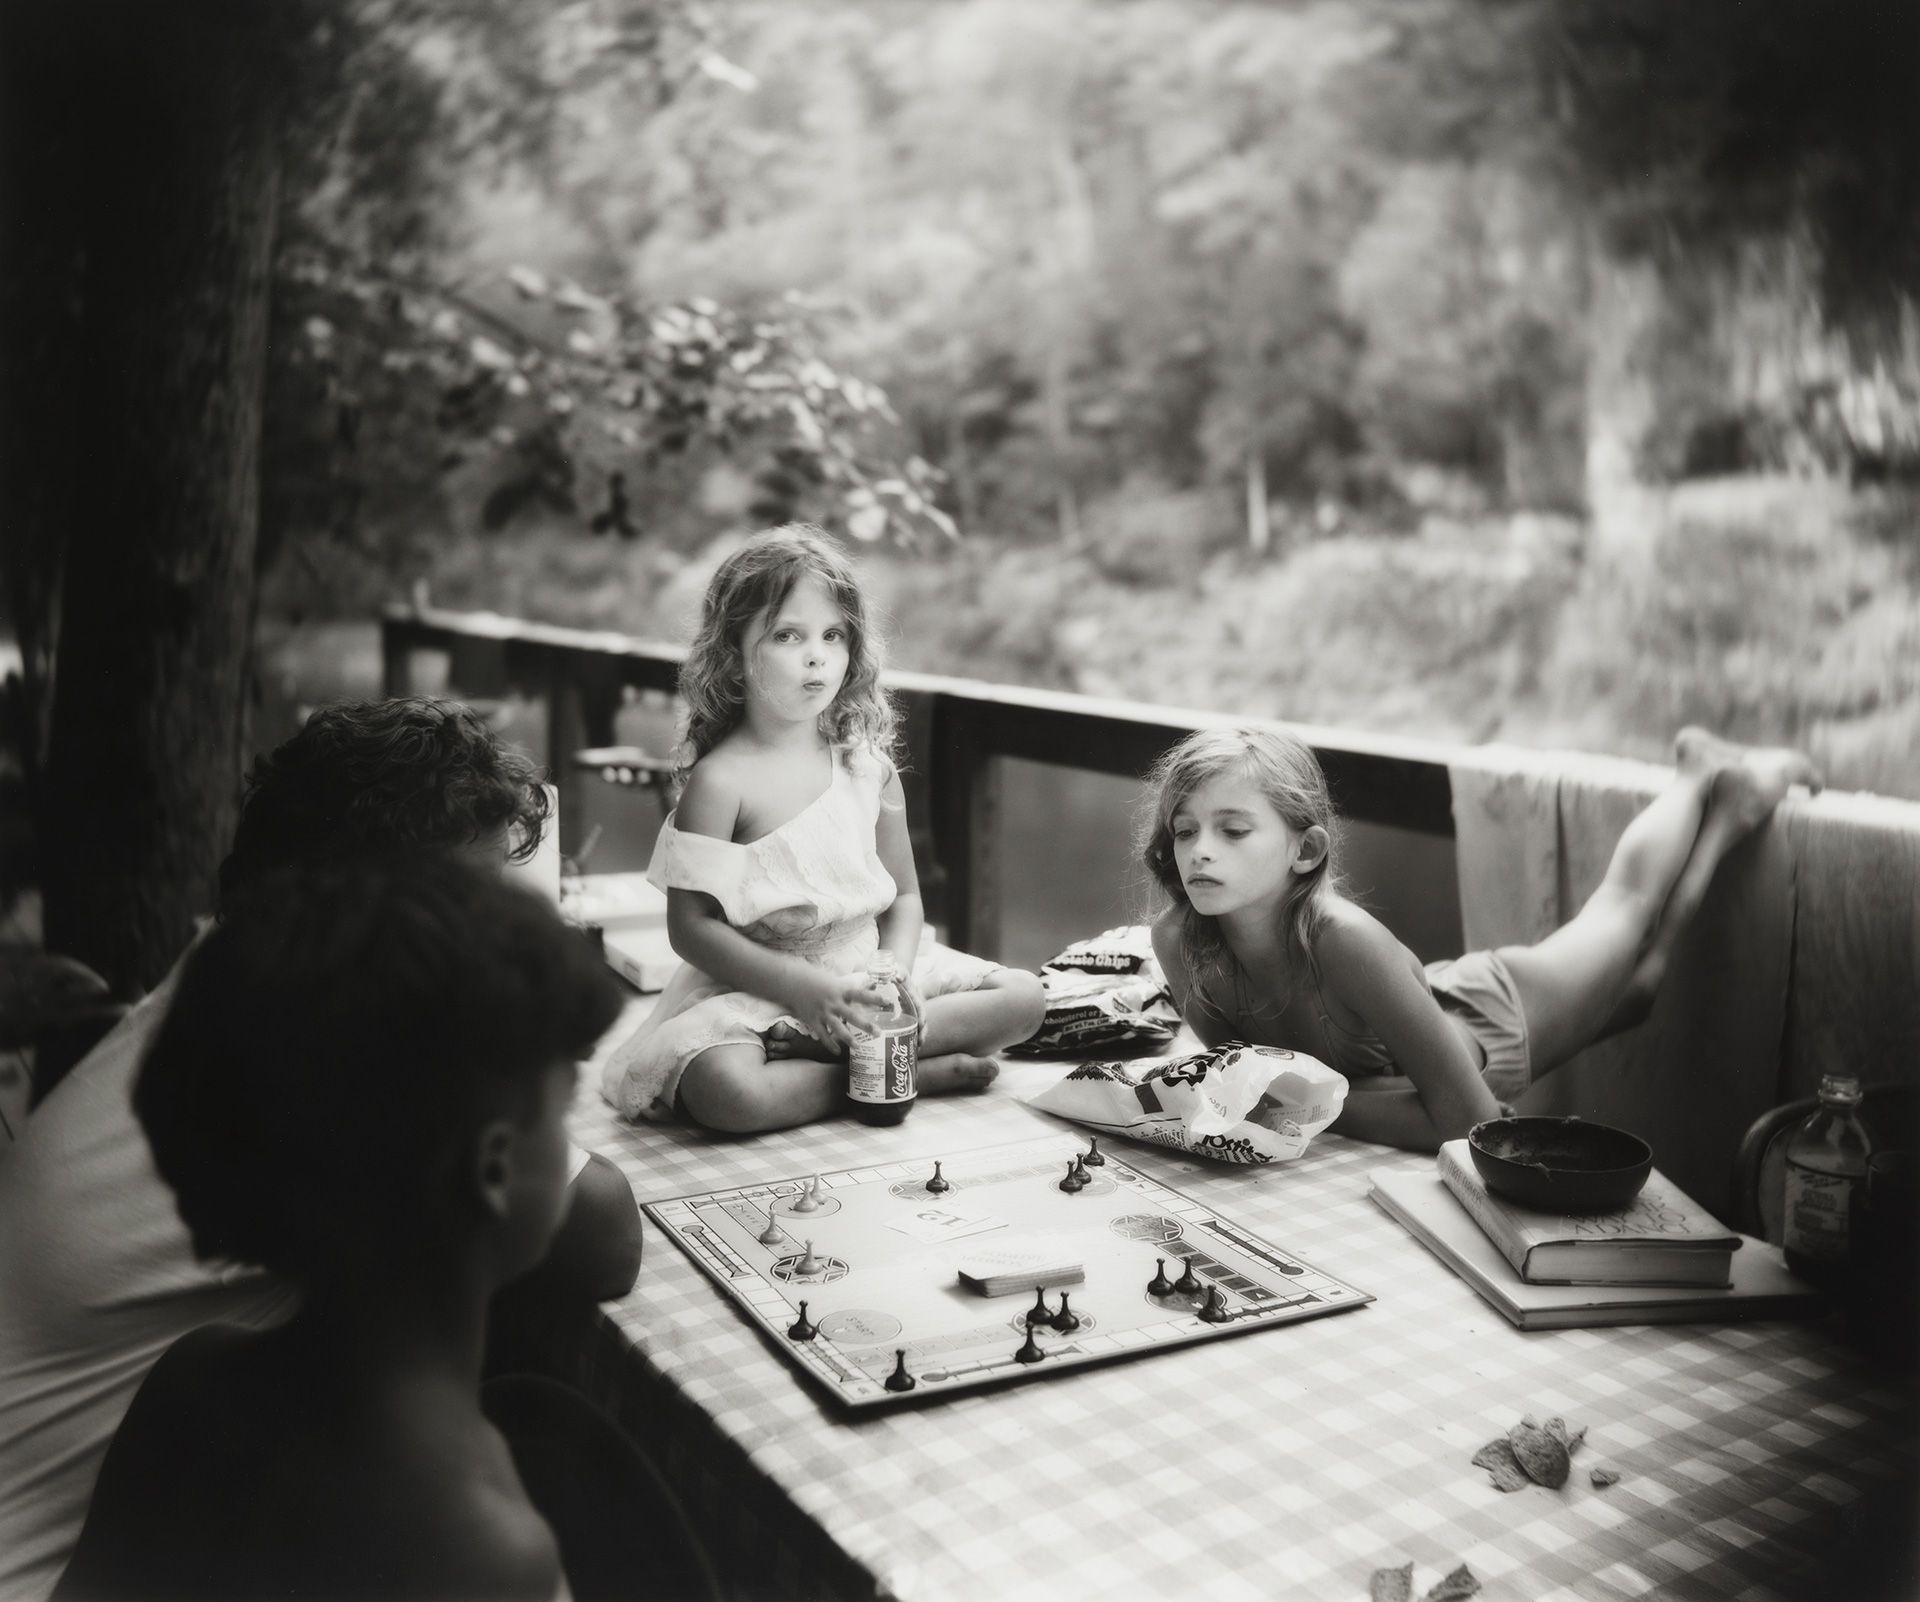 Sally Mann (b. 1951), Sorry Game, 1989. Gelatin silver print: sheet, 19 15/16 × 23 13/16 in. (50.6 × 60.5 cm); image, 19 5/8 × 23 5/16 in. (49.8 × 59.2 cm). Whitney Museum of American Art, New York; gift of The Bohen Foundation 2002.349. © Sally Mann